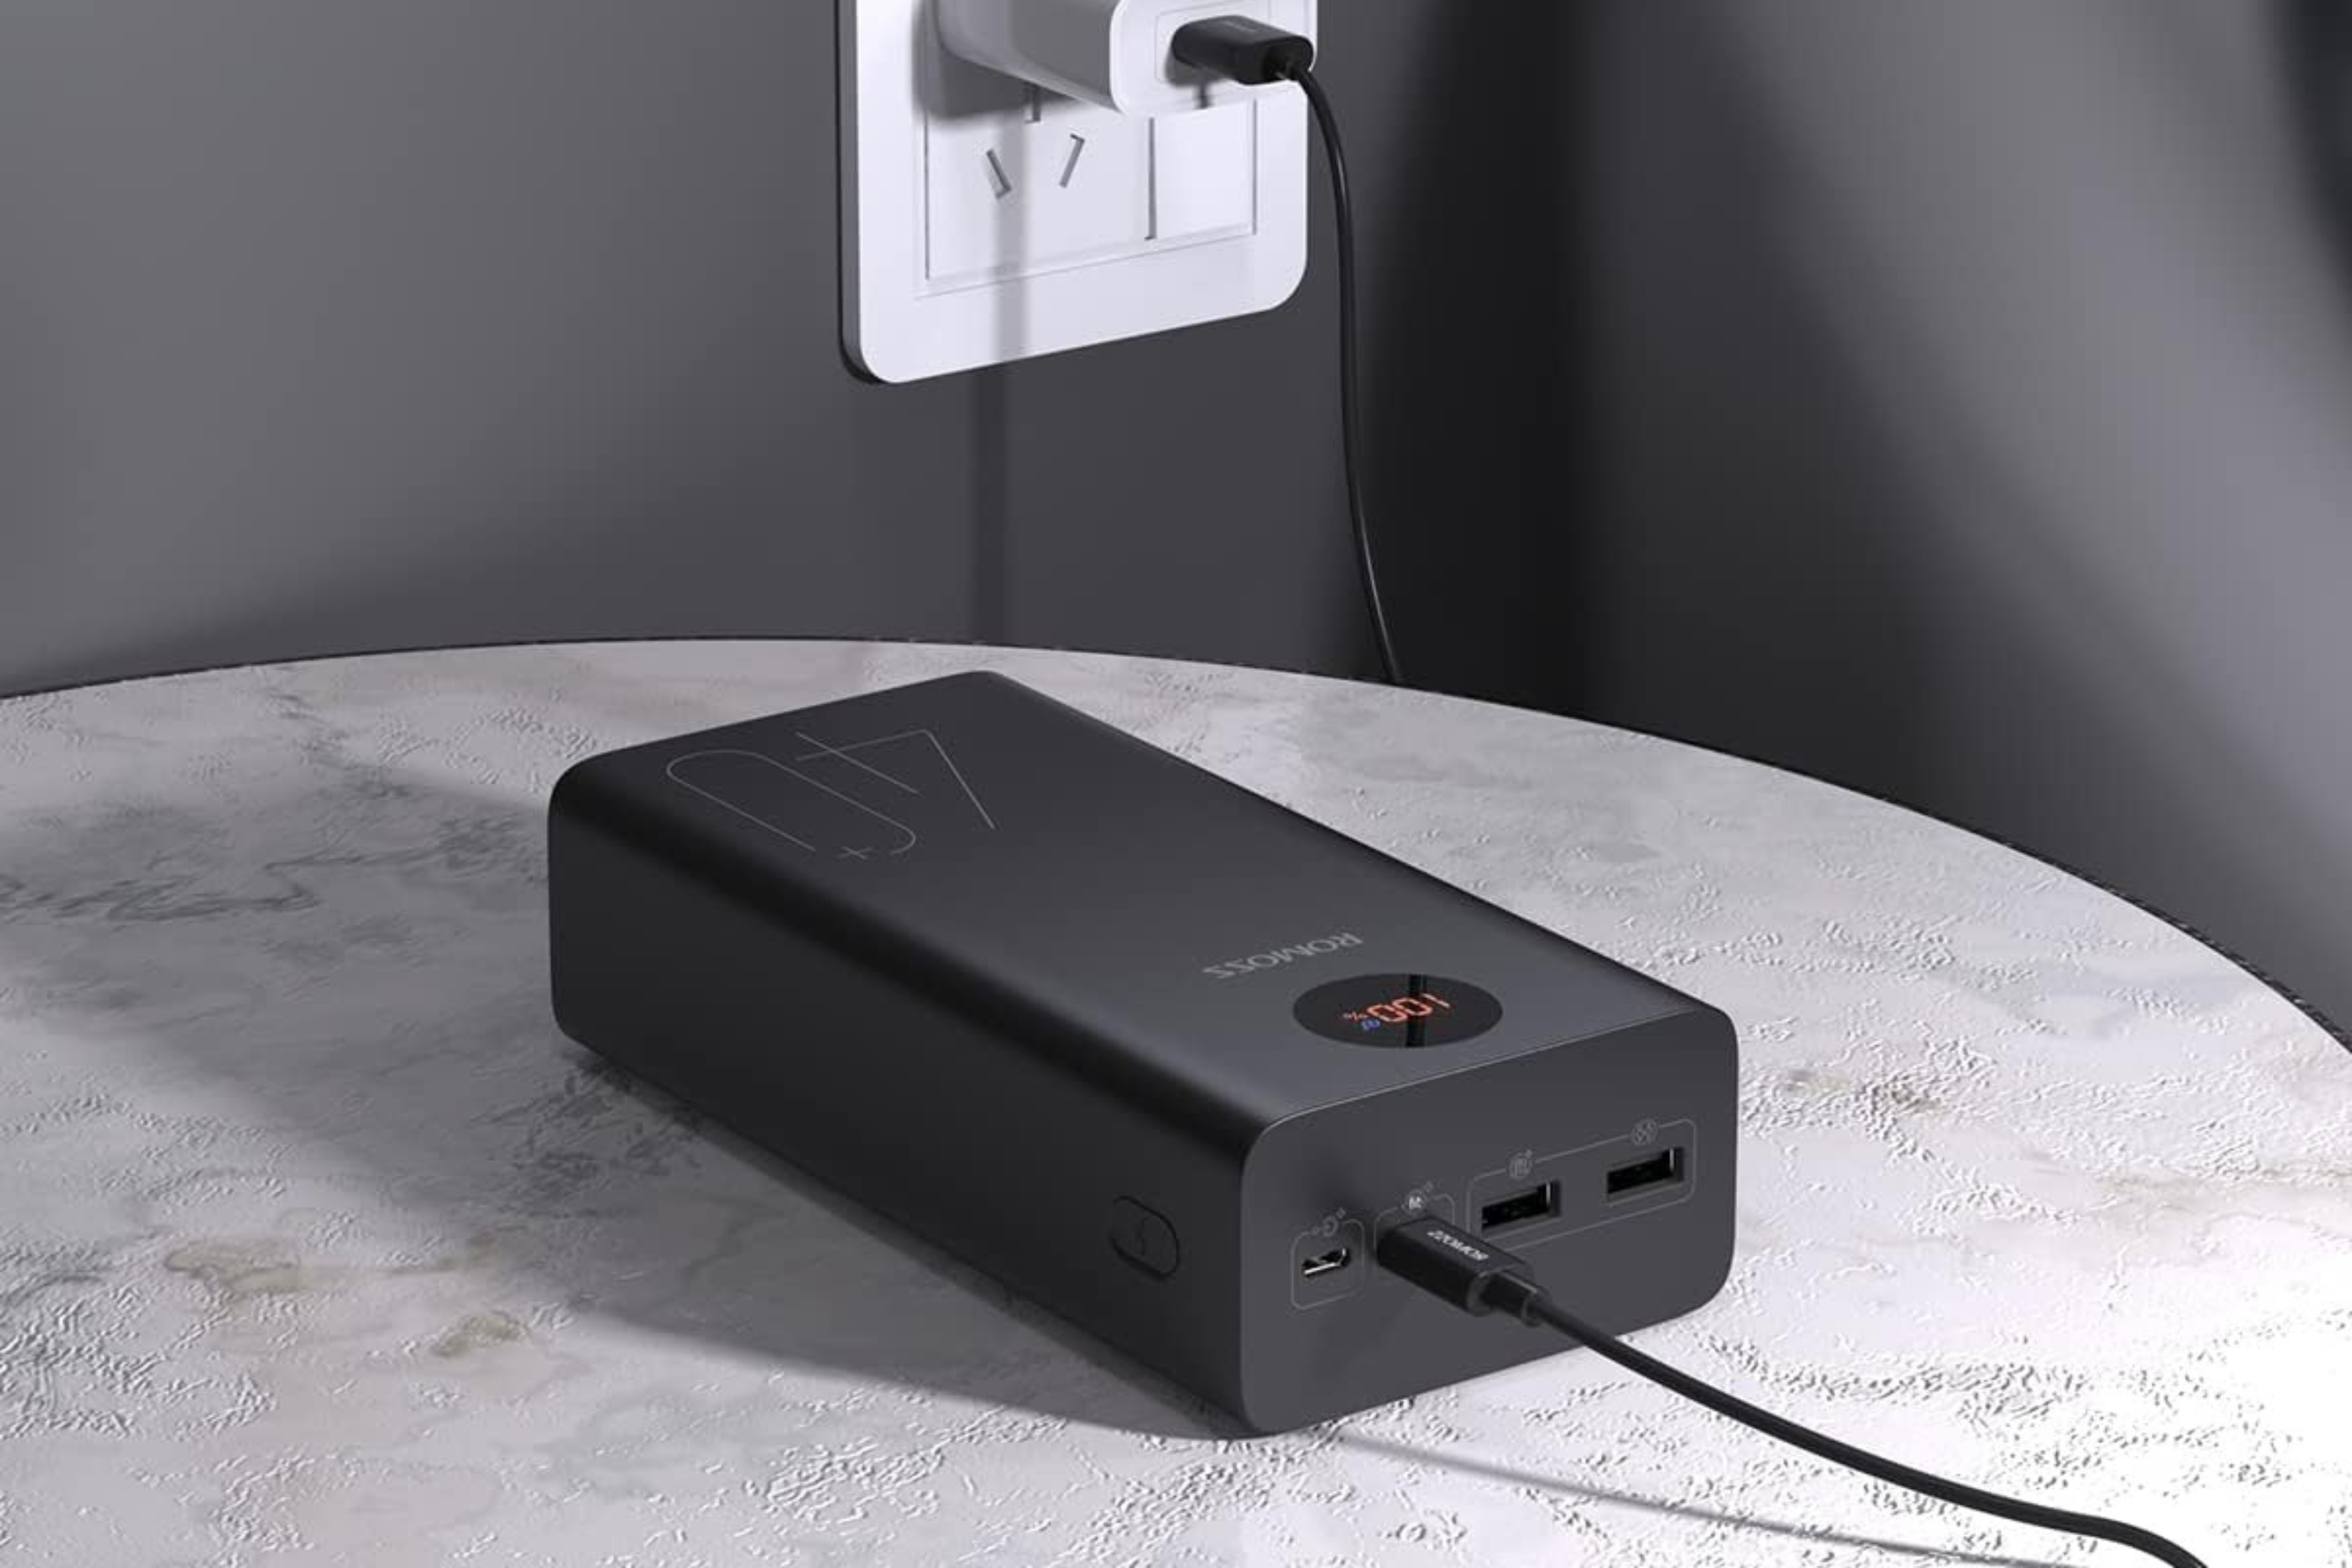 ROMOSS 40000mAh Portable Power Bank on table being charged